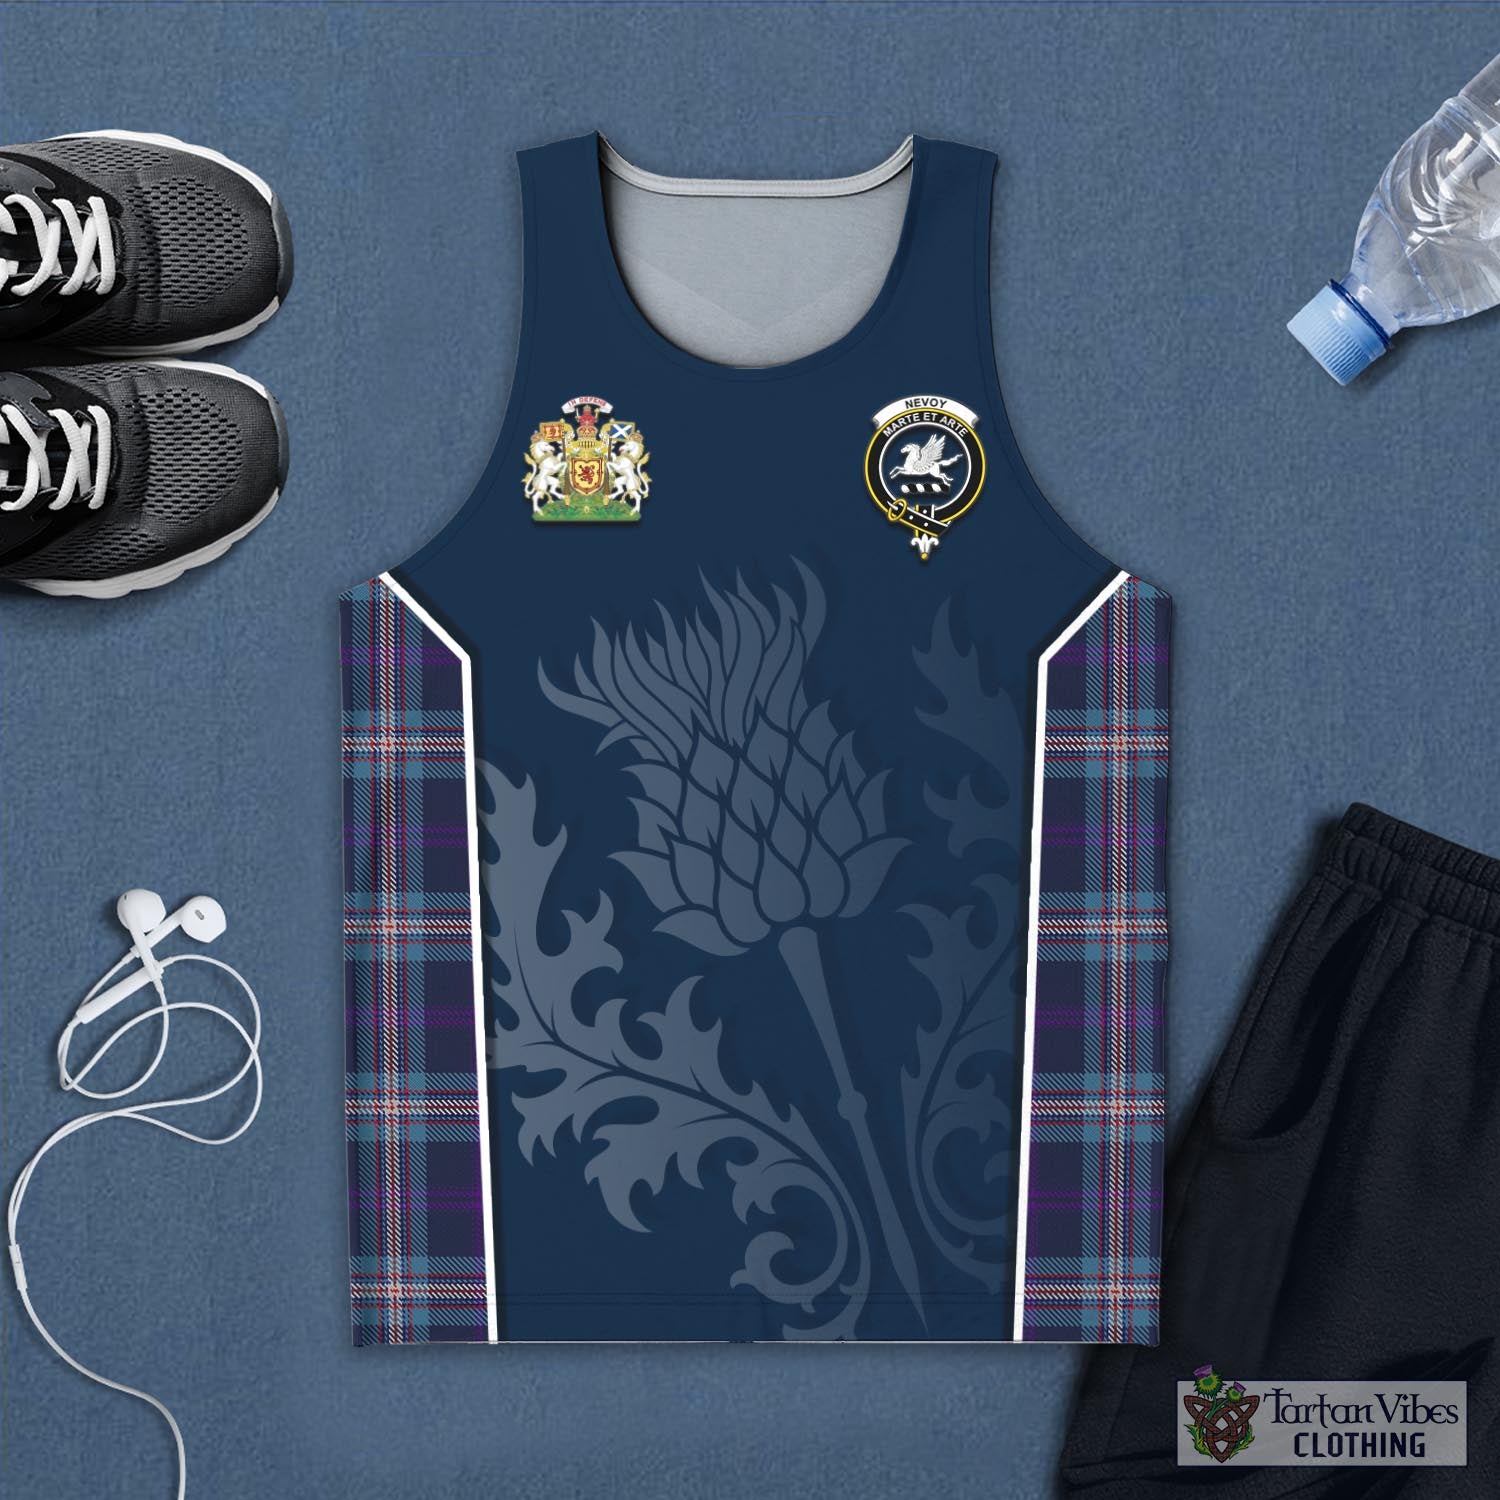 Tartan Vibes Clothing Nevoy Tartan Men's Tanks Top with Family Crest and Scottish Thistle Vibes Sport Style